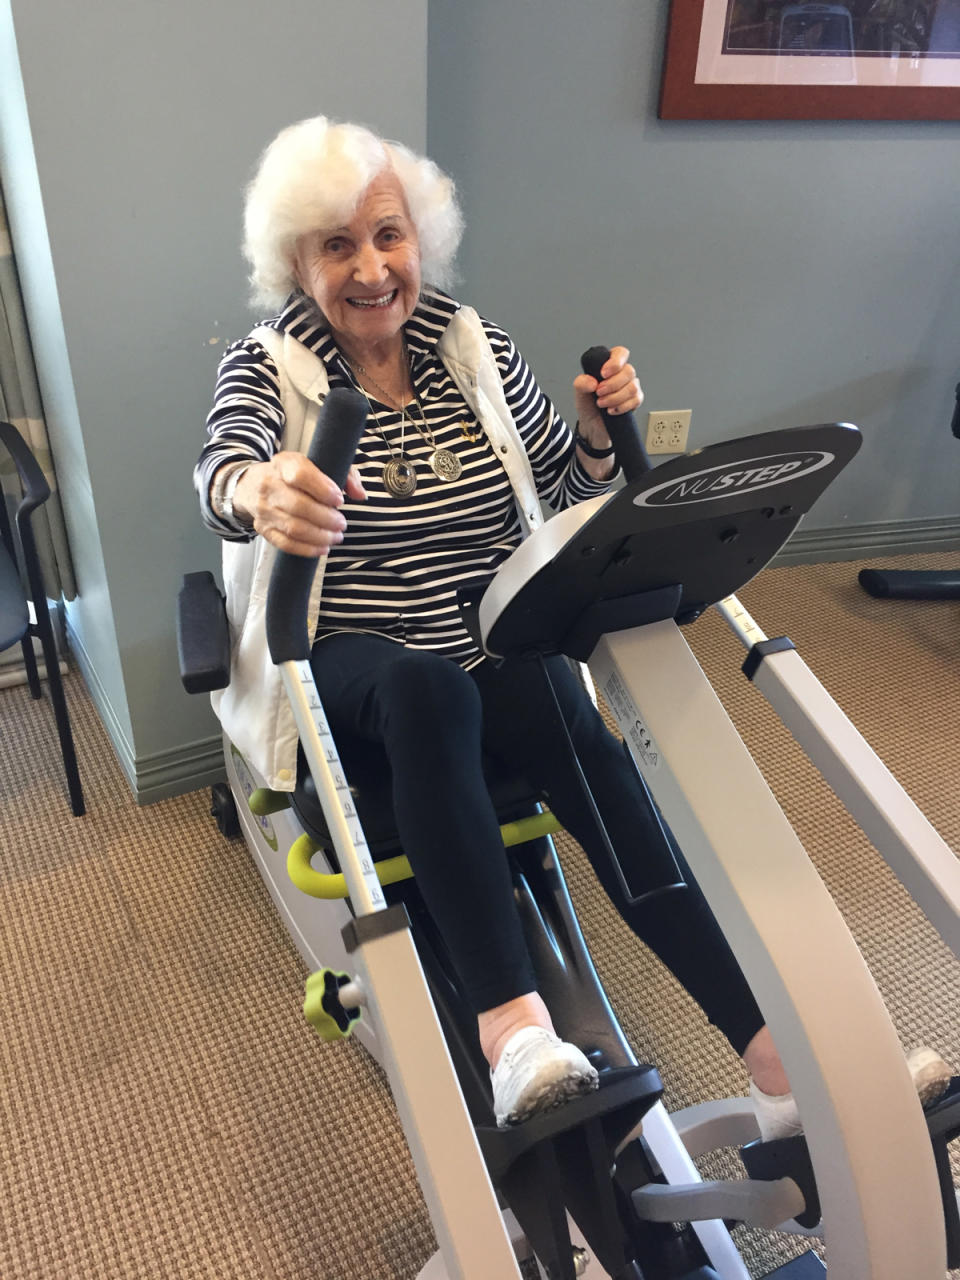 Zlotnik is ready for a workout to celebrate 101 years. (Photo: Courtesy of Ashley Gold)